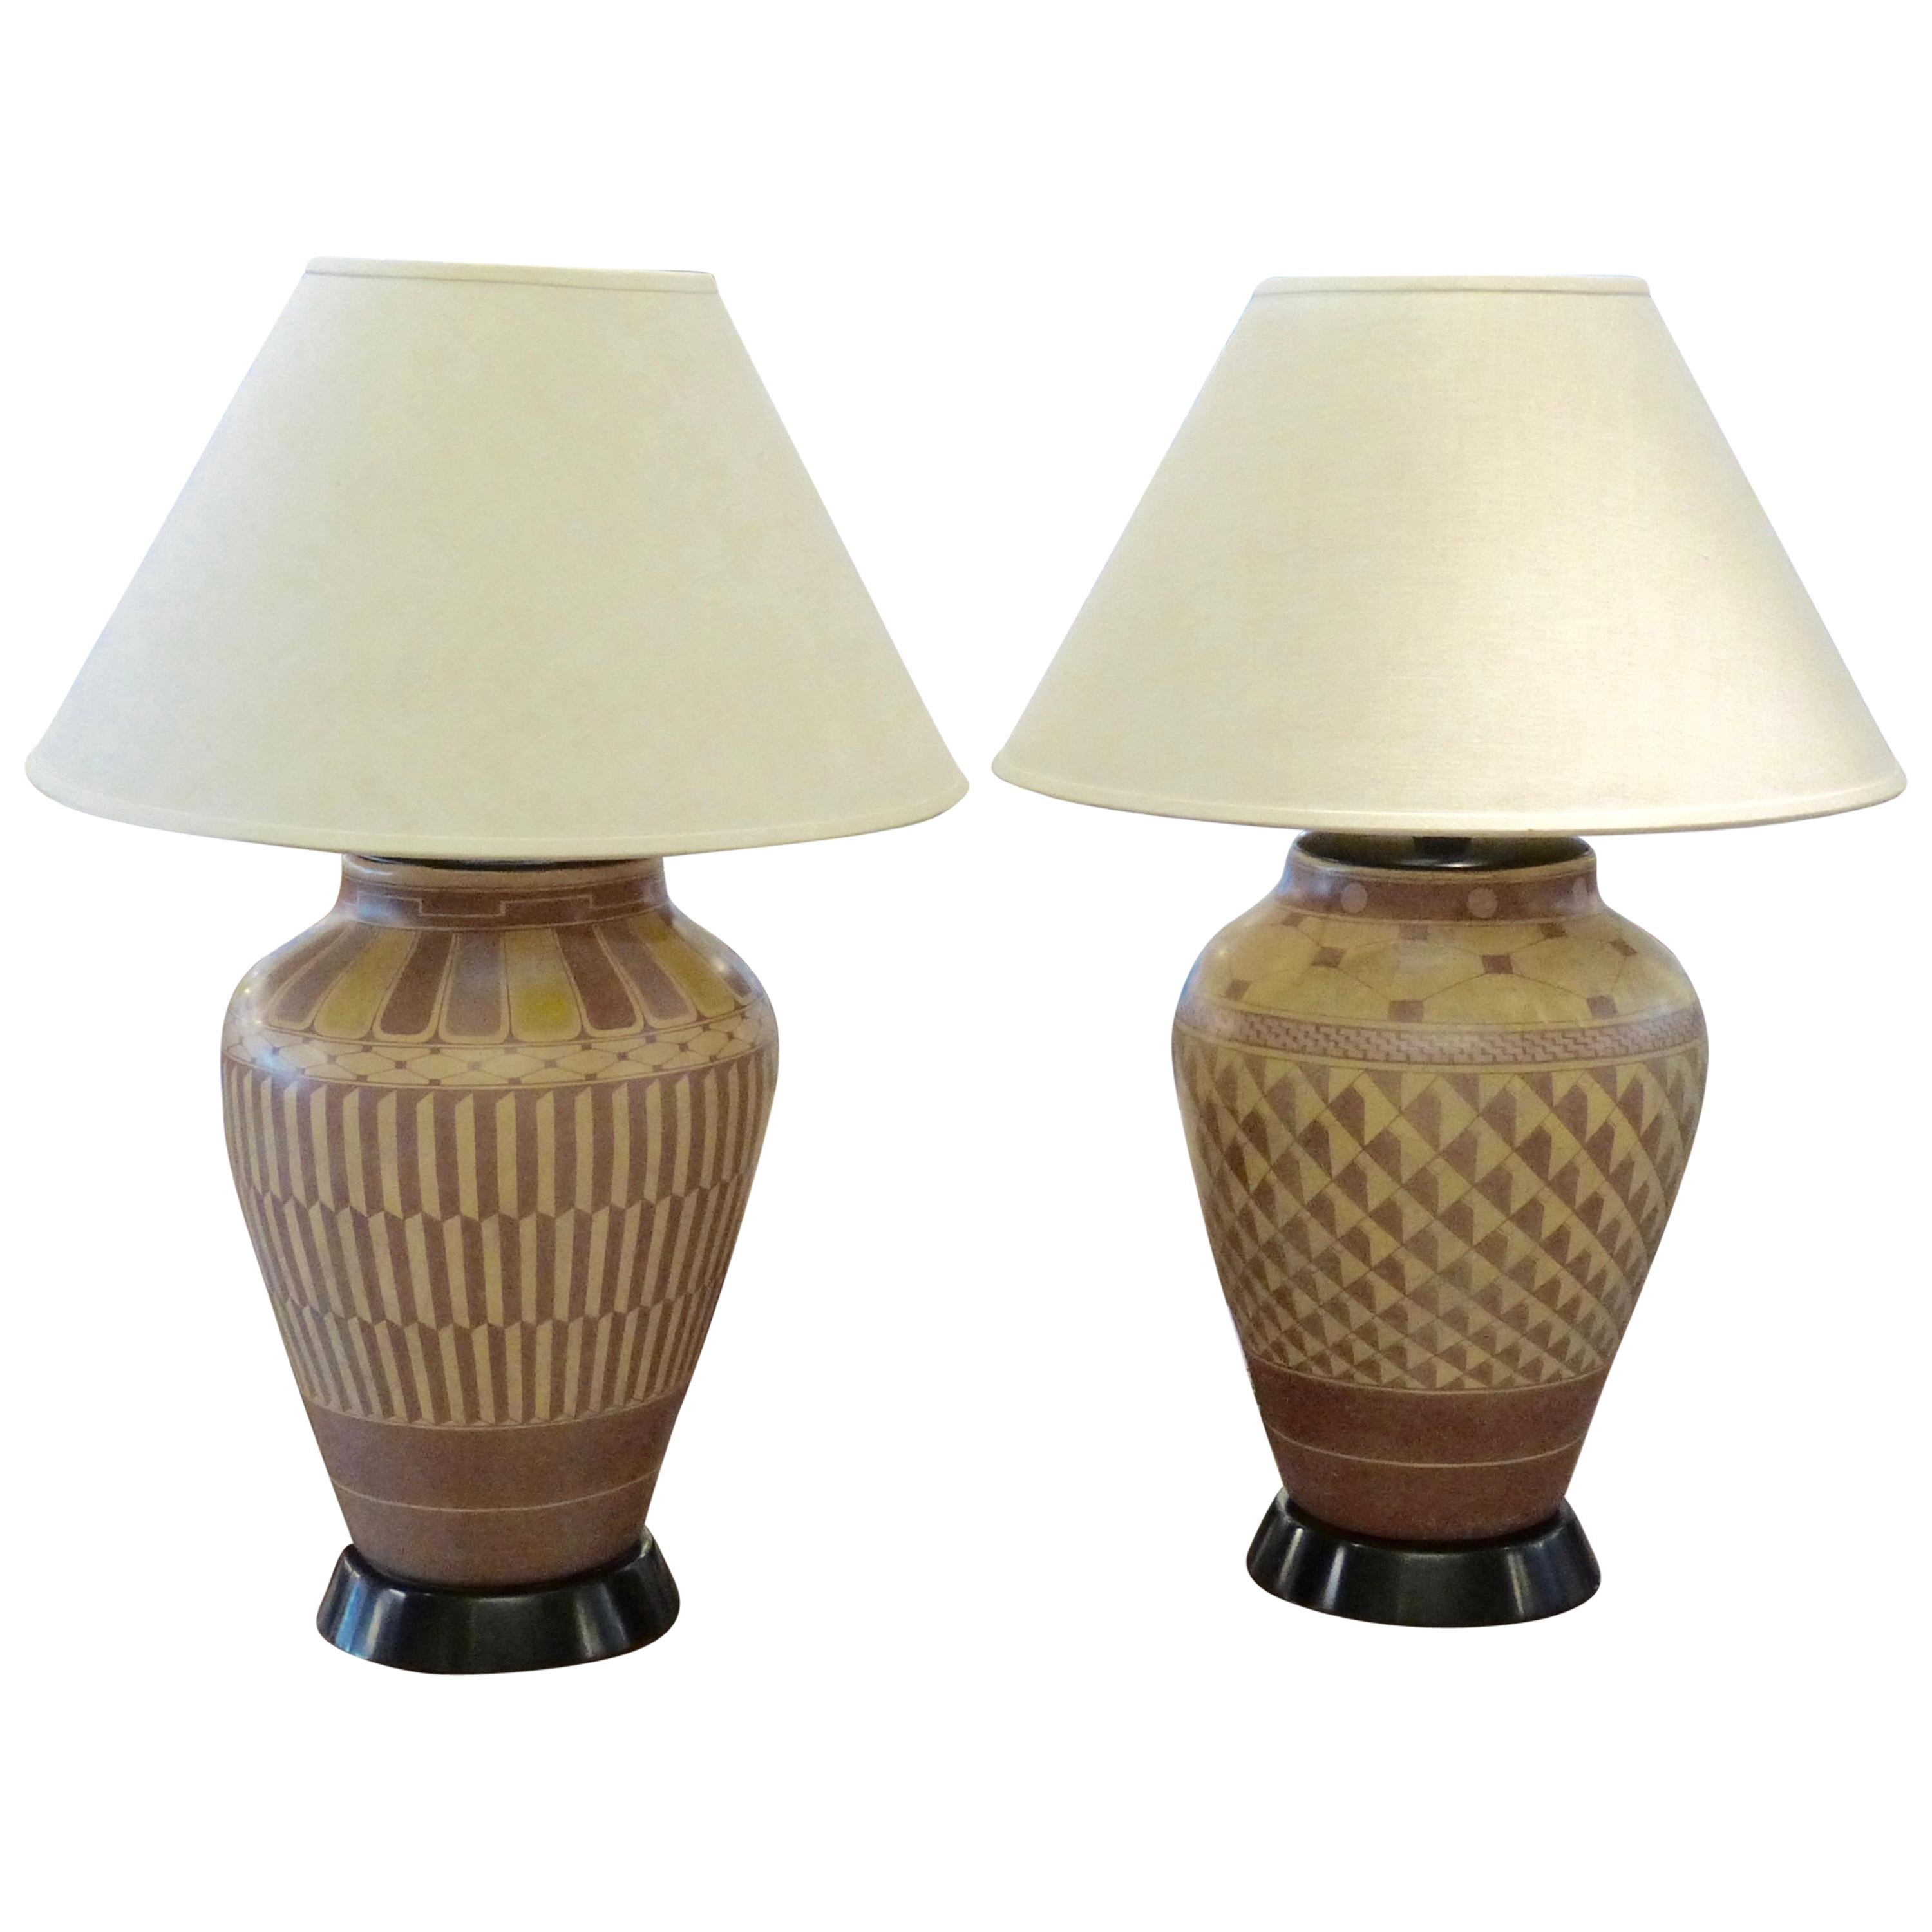 Pair of Steve Chase Designed Native American Pottery Lamps